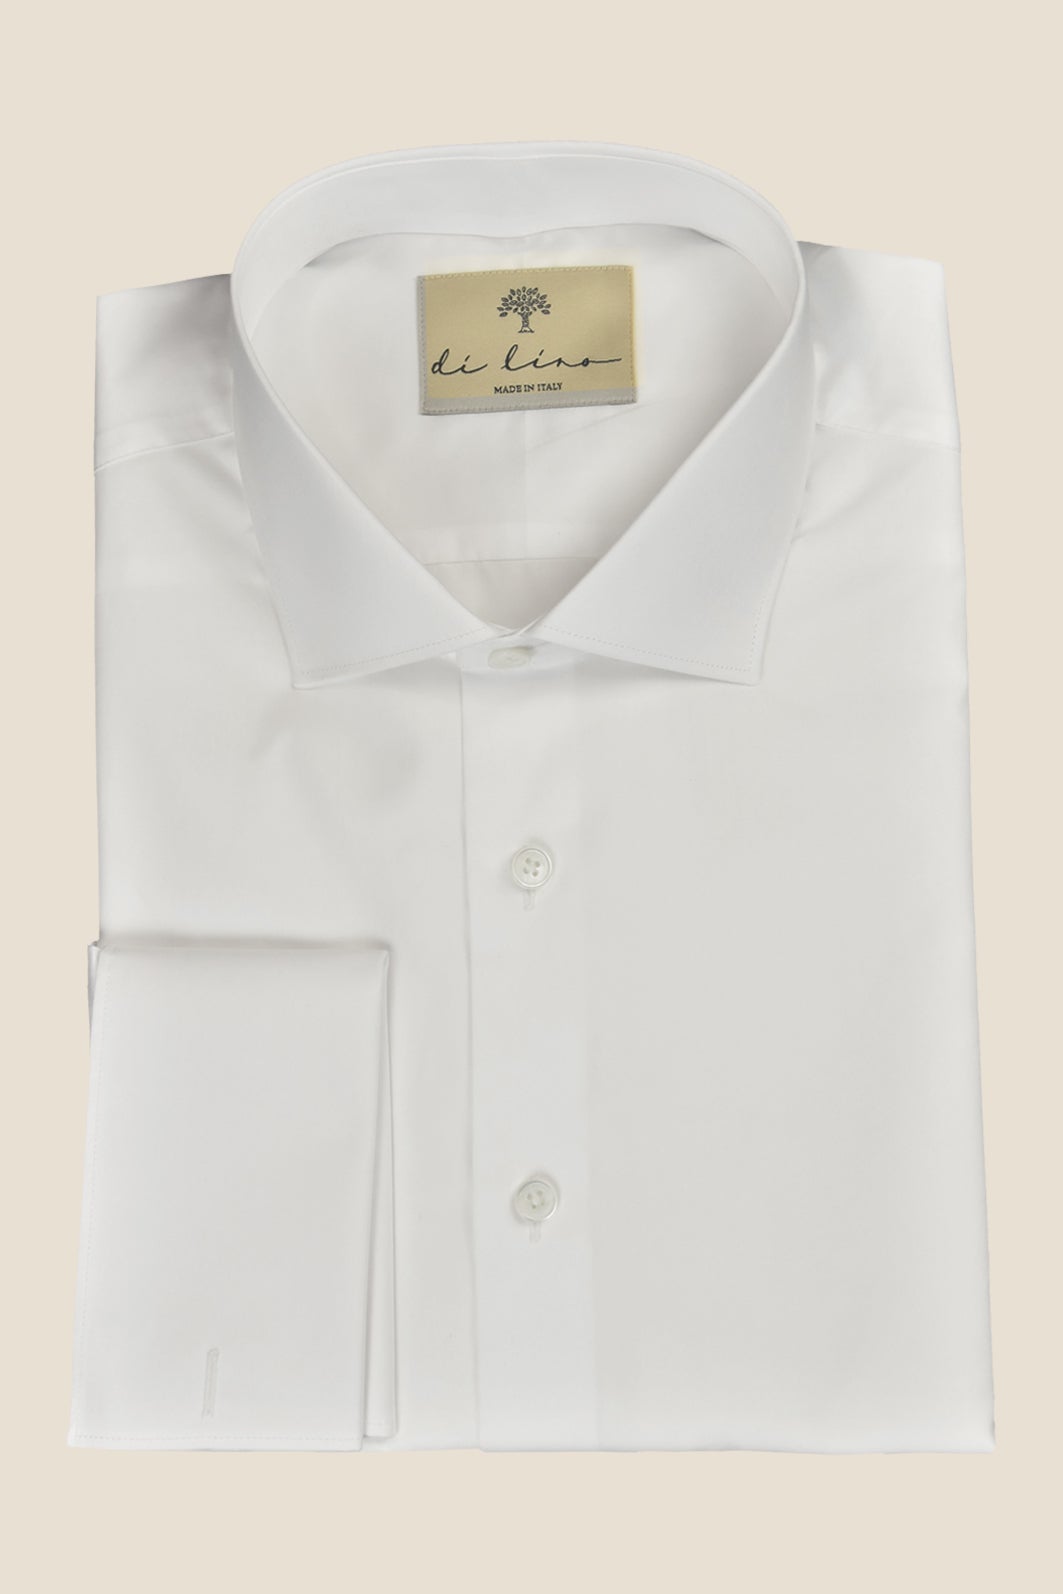 White business shirt made of organic cotton with a classic shark collar and cuffs and a casual cut - Made to order